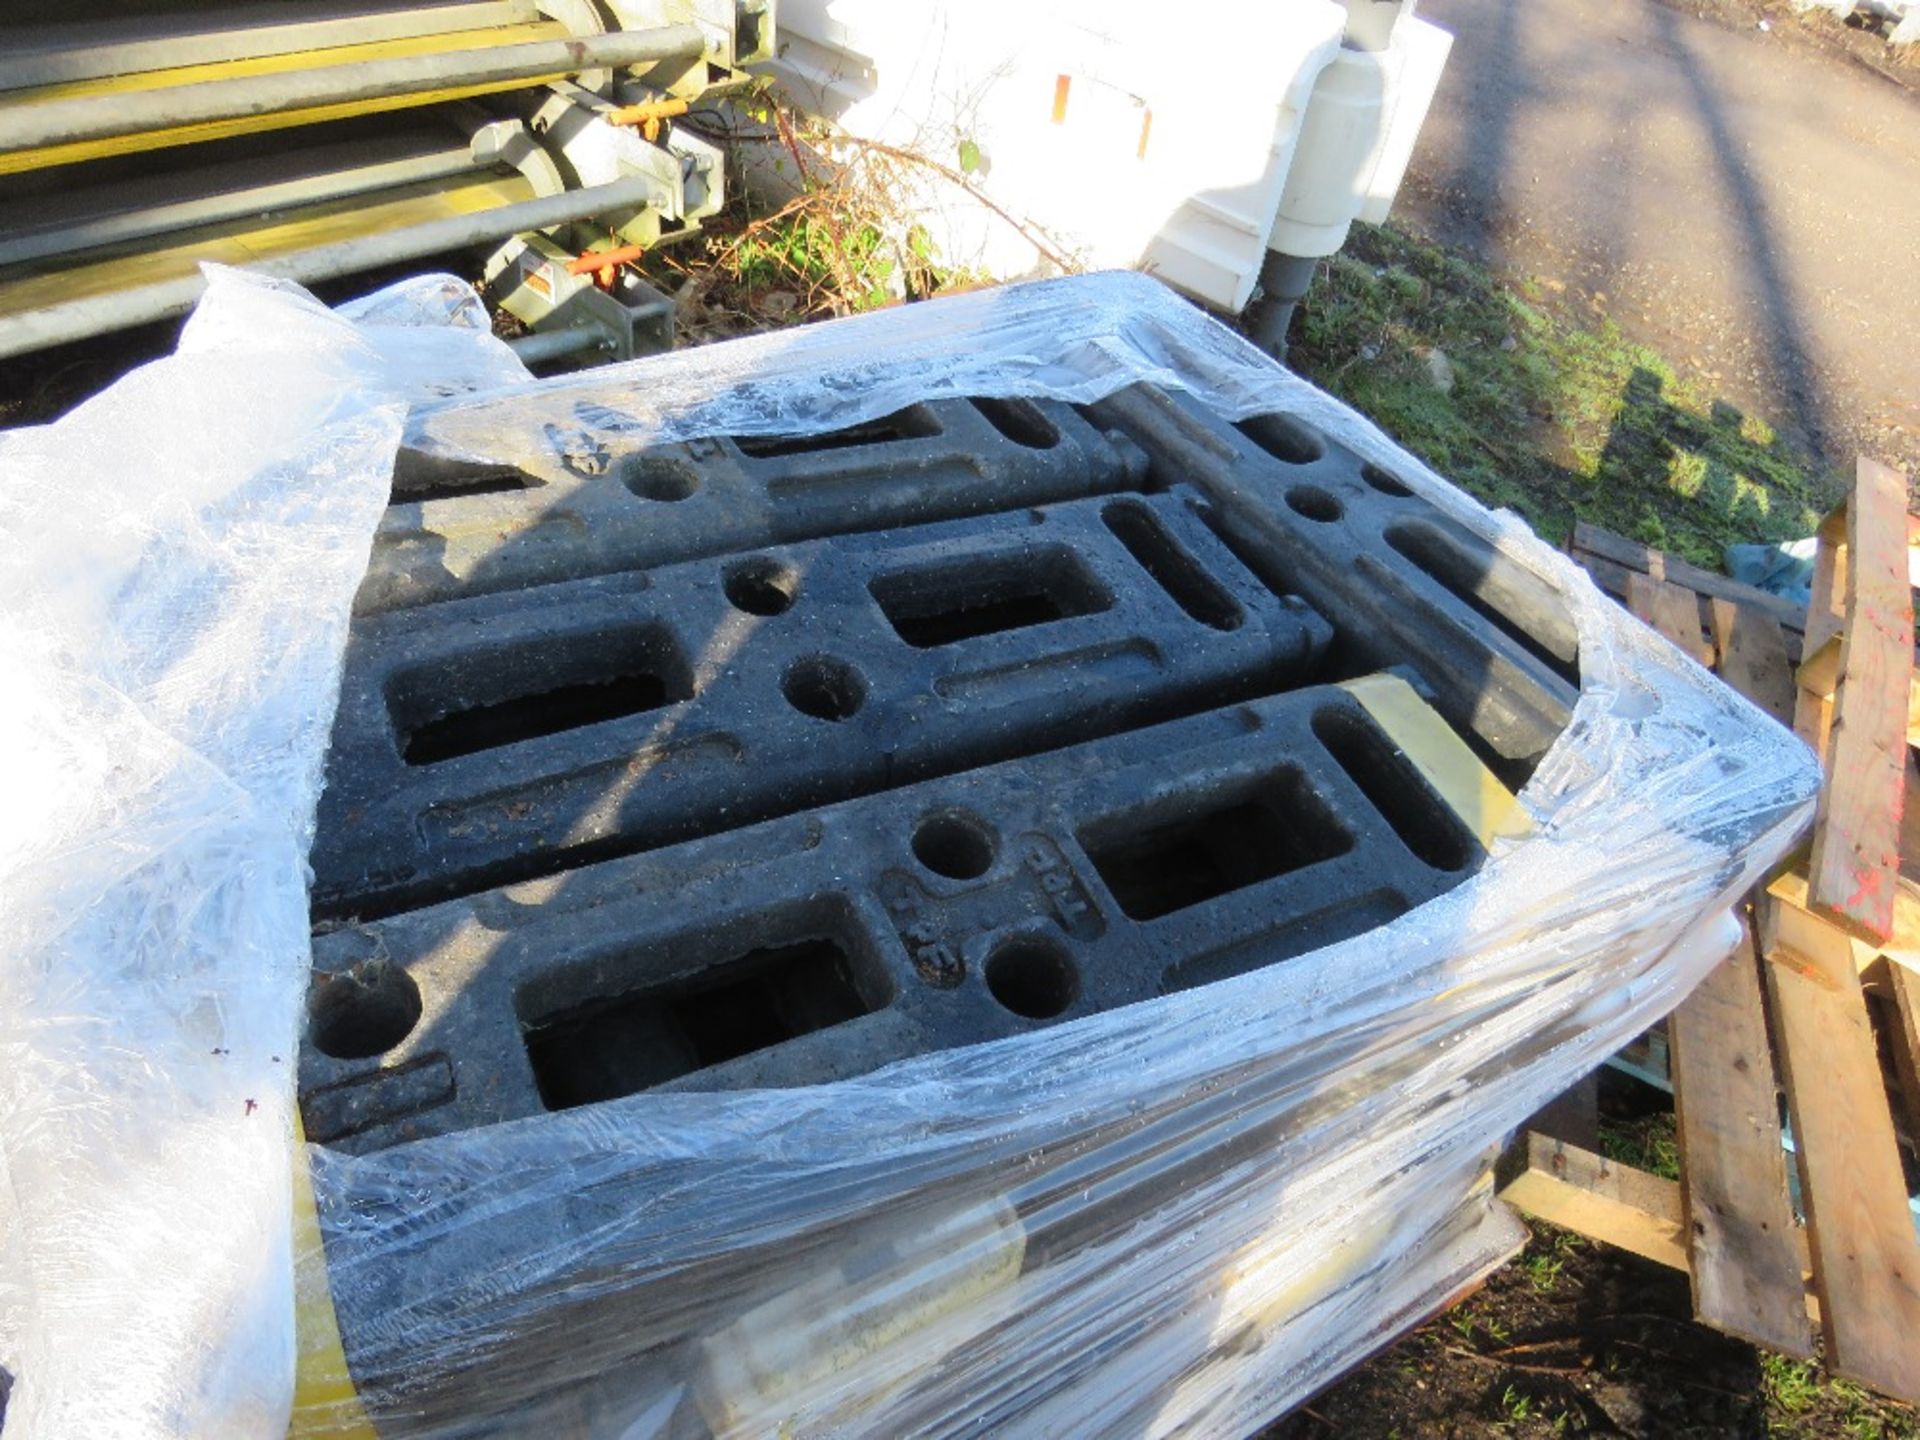 2 X PALLETS OF HERAS TYPE SITE FENCE BASES / BLOCKS. - Image 6 of 6